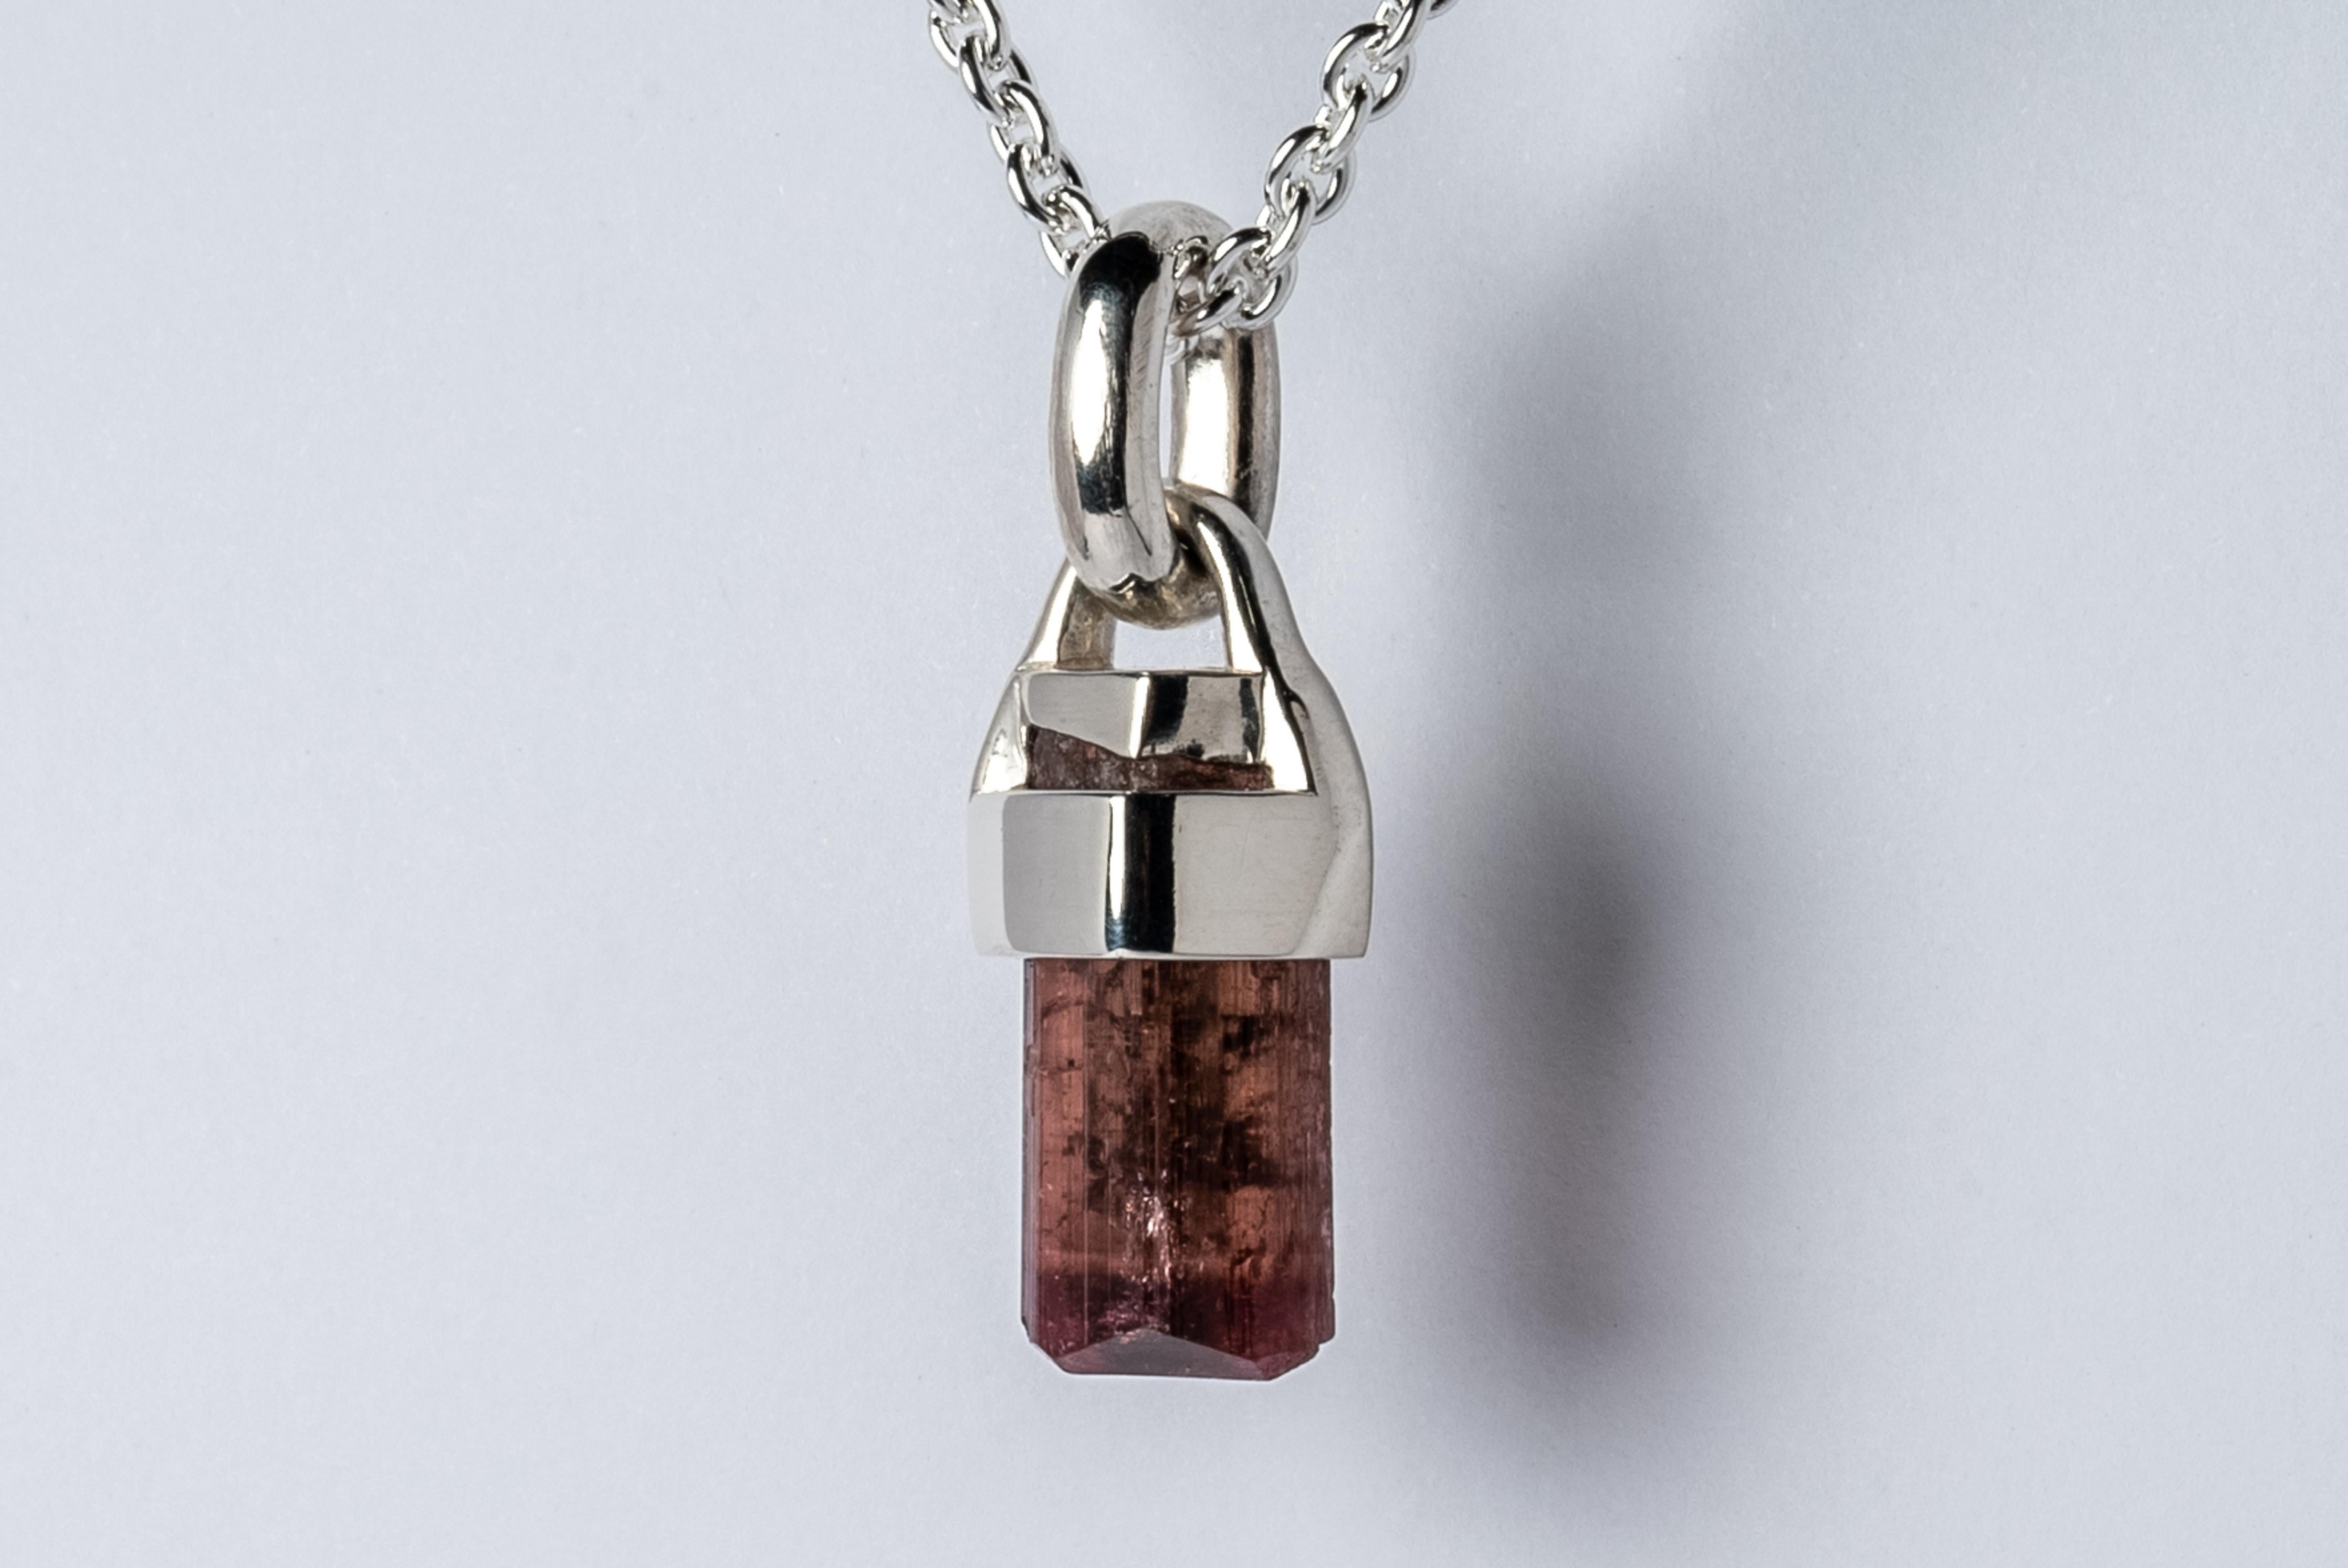 Necklace in polished sterling silver and rough of rubellite, a pink-red tourmaline. The Talisman series is an exploration into the power of natural crystals. The crystals used in these pieces are discovered through adventure and are hand selected.